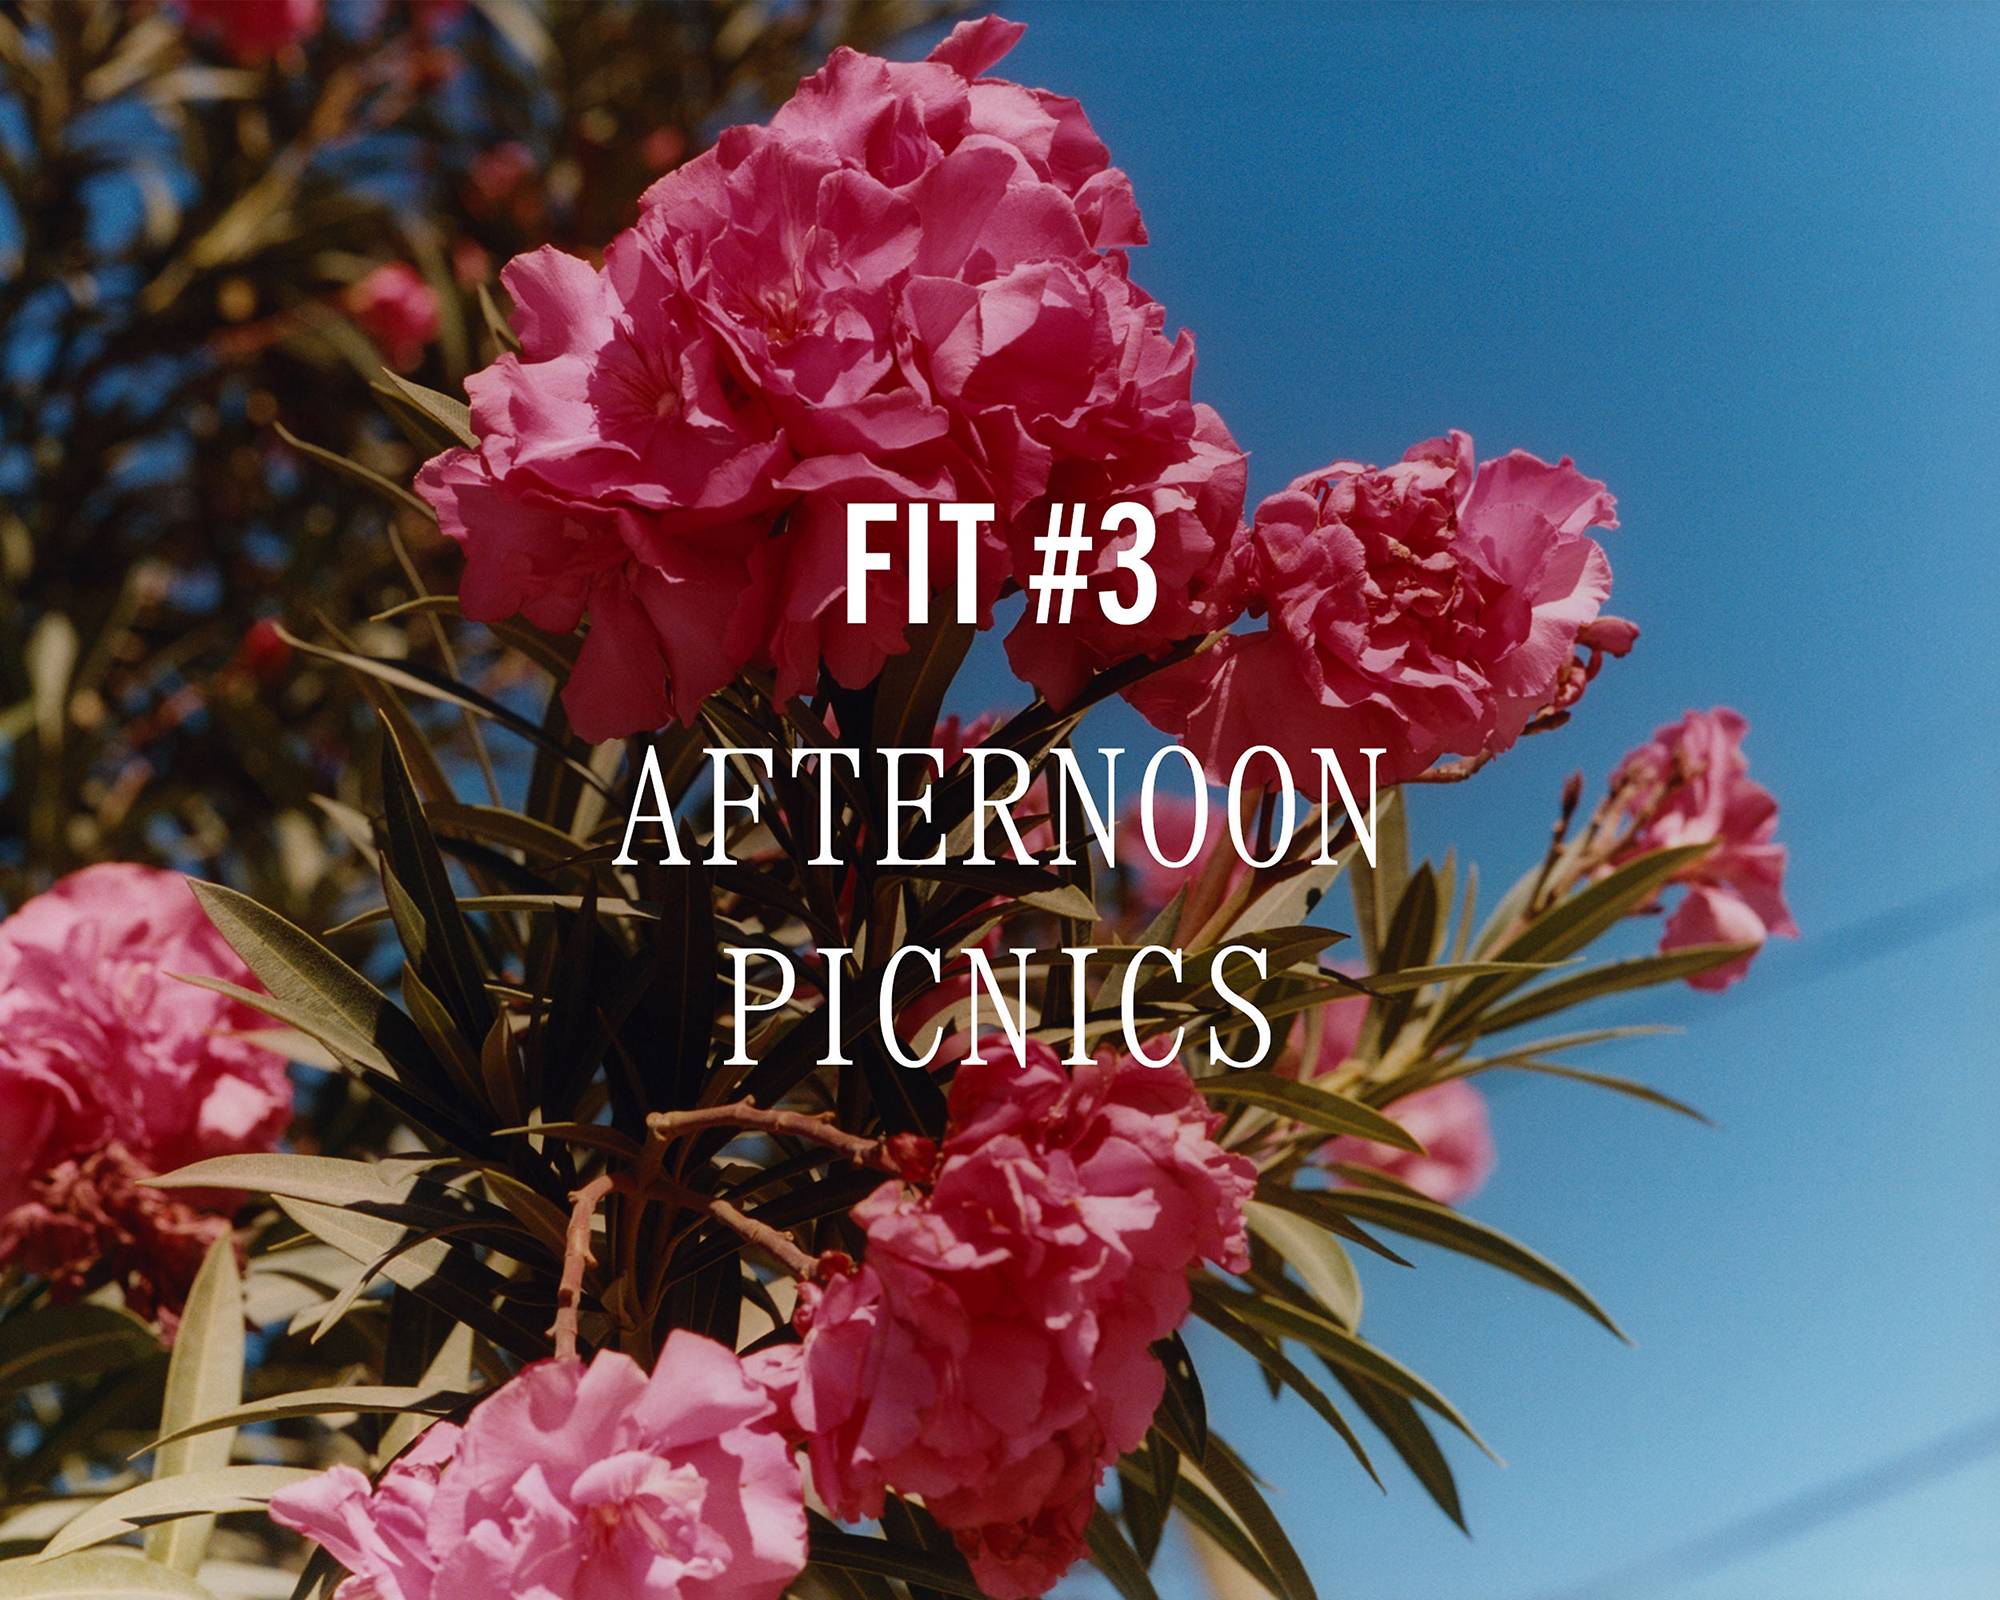 Image of pink flowers with overlaid text "Fit #3 AFTERNOON PICNICS"